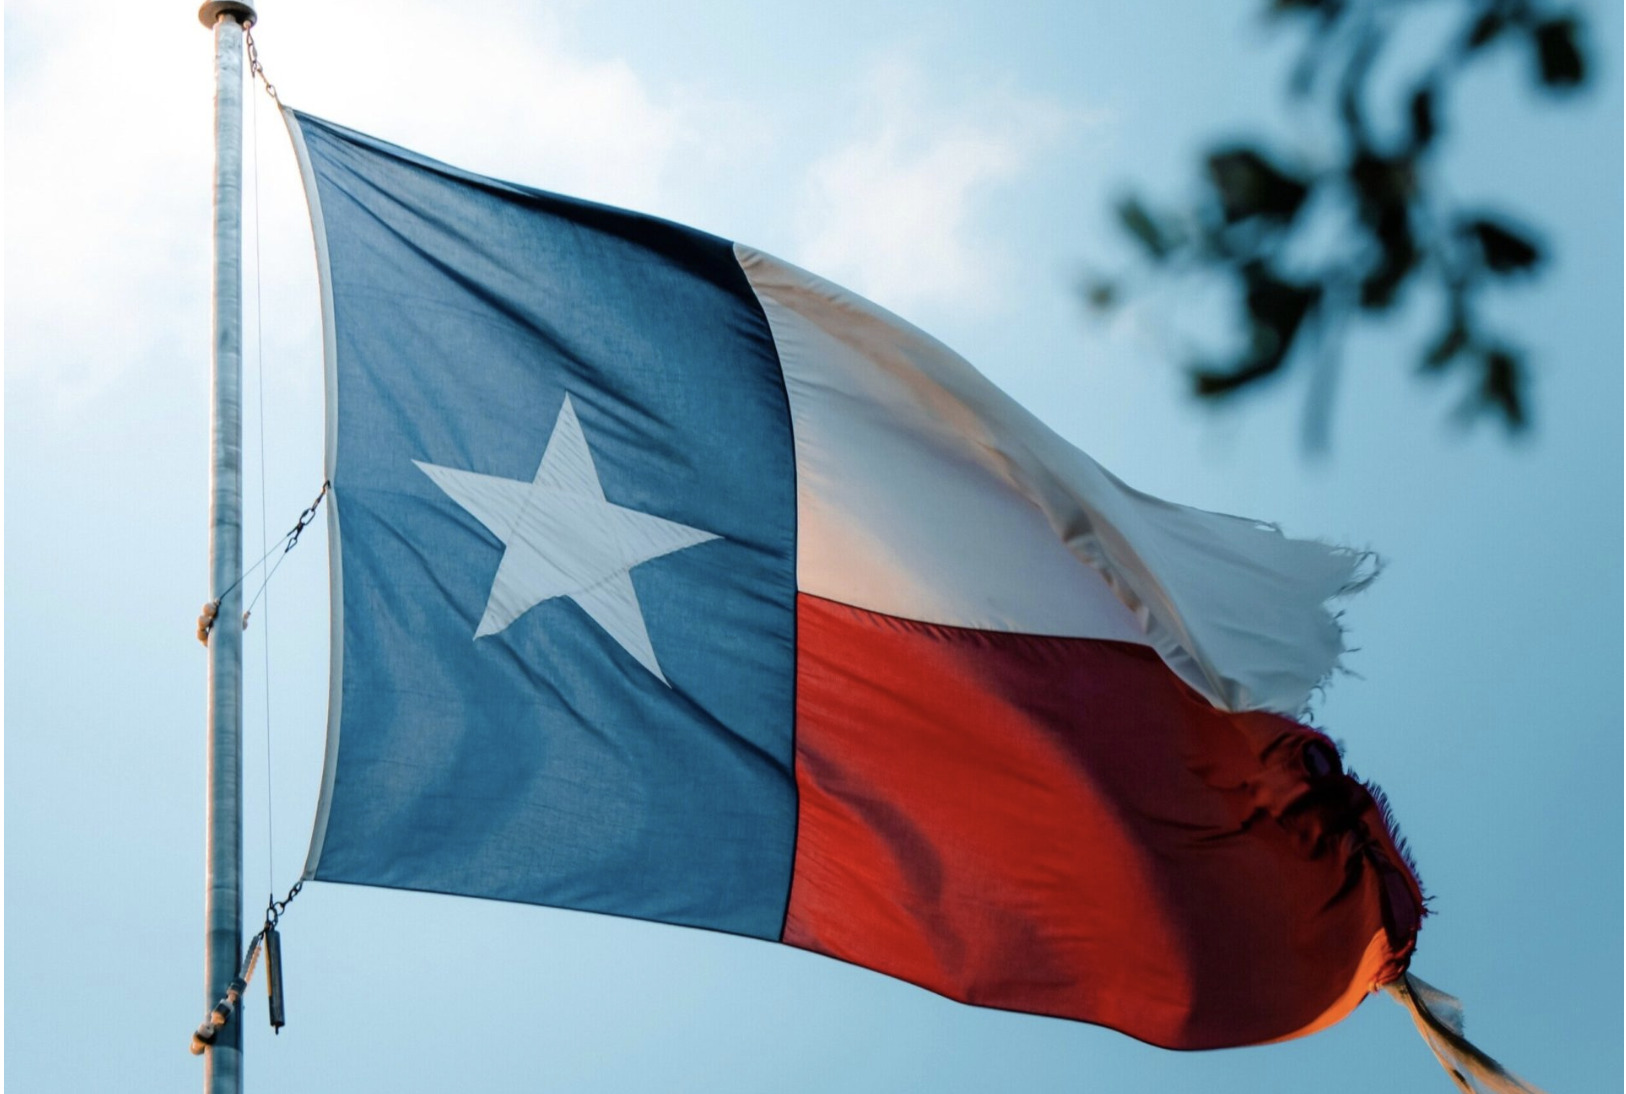 If Texas Wants to Secede, No One Should Stand in Its Way. SMERCONISH